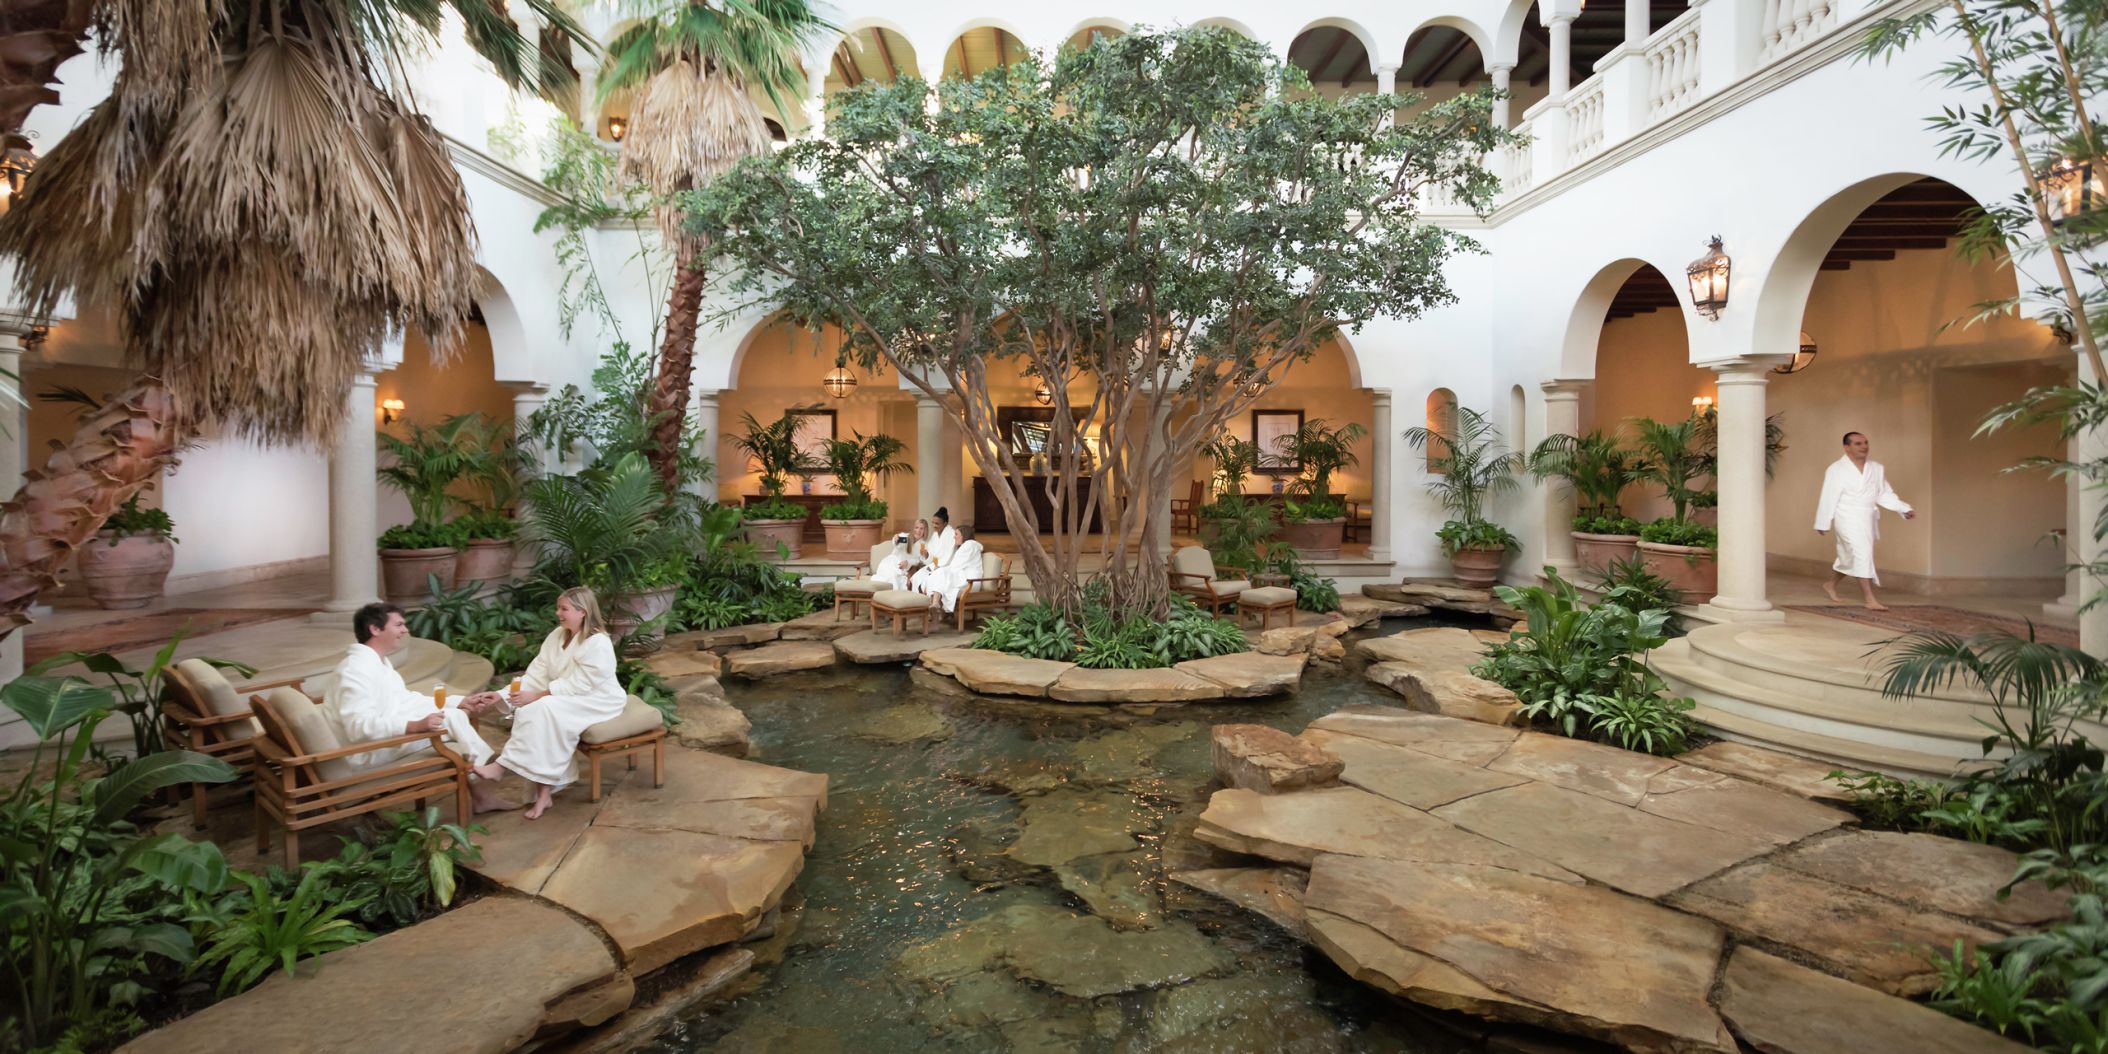 Spa atrium with classic, addison mizner style inspired architecture with lush, think greenery and people with spa robes waiting for their treatments.